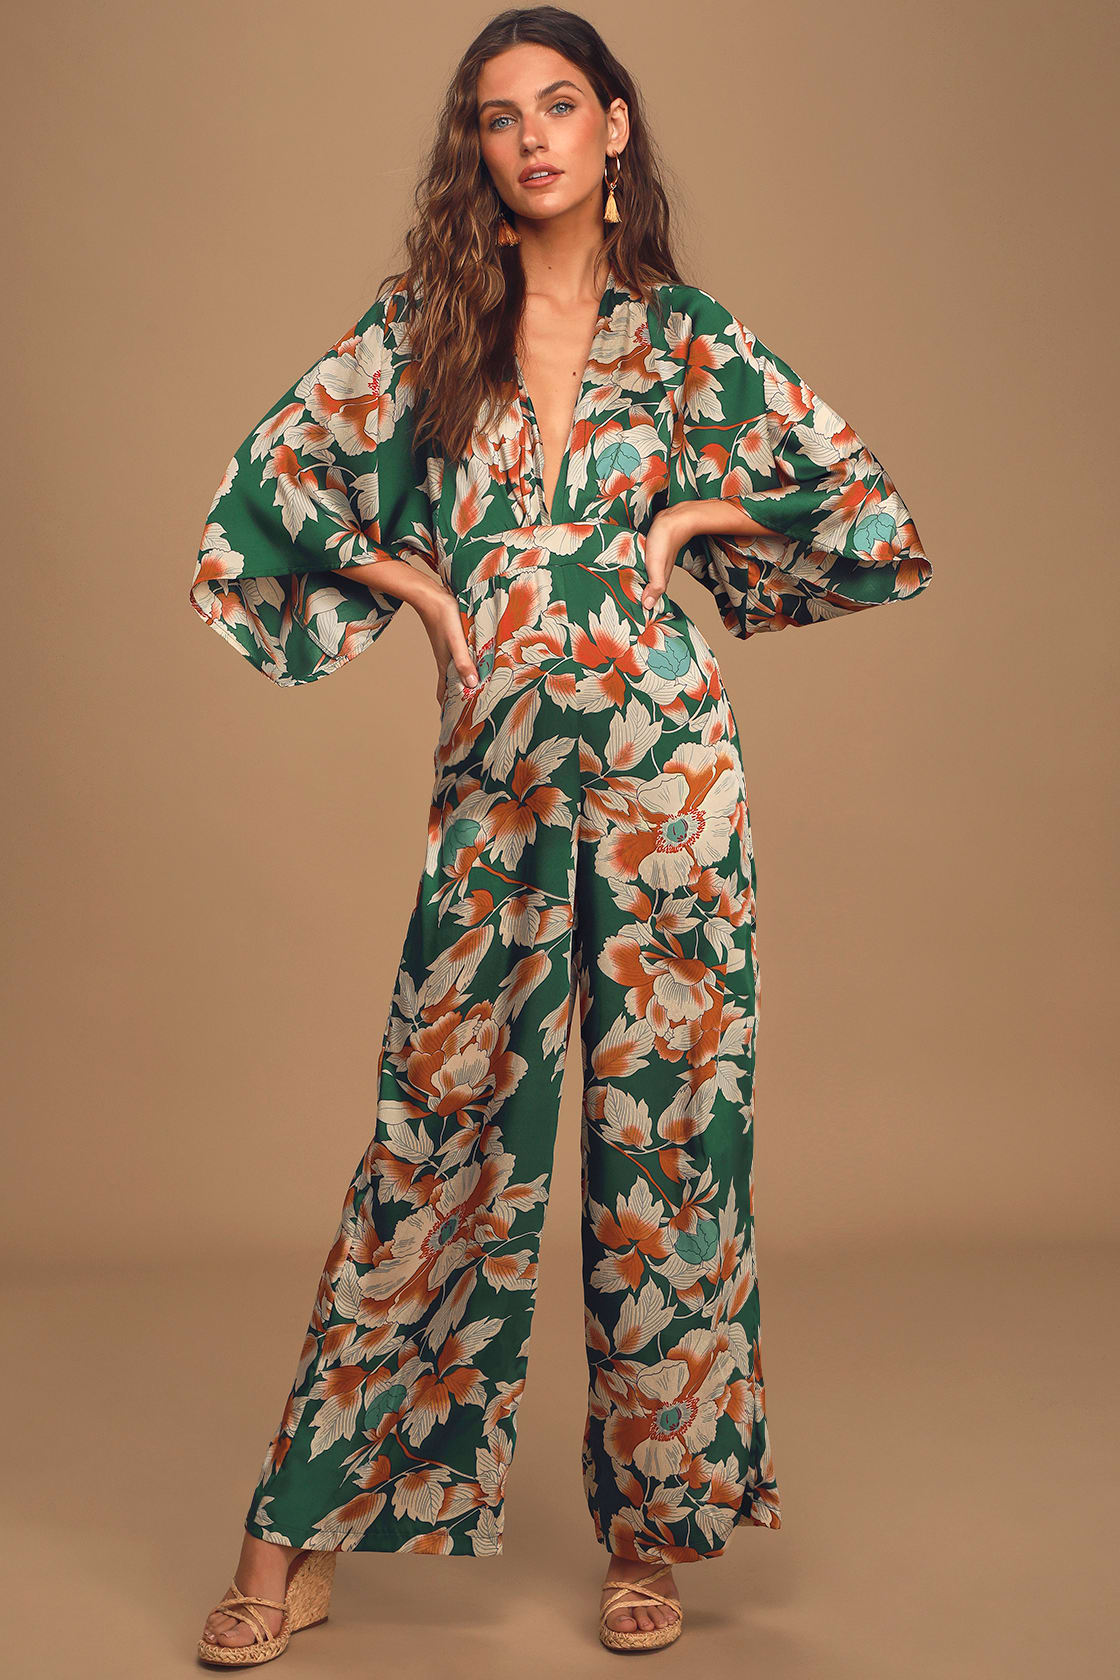 Floral Jumpsuit for Wedding Guest to Wear to a Hawaiian Wedding